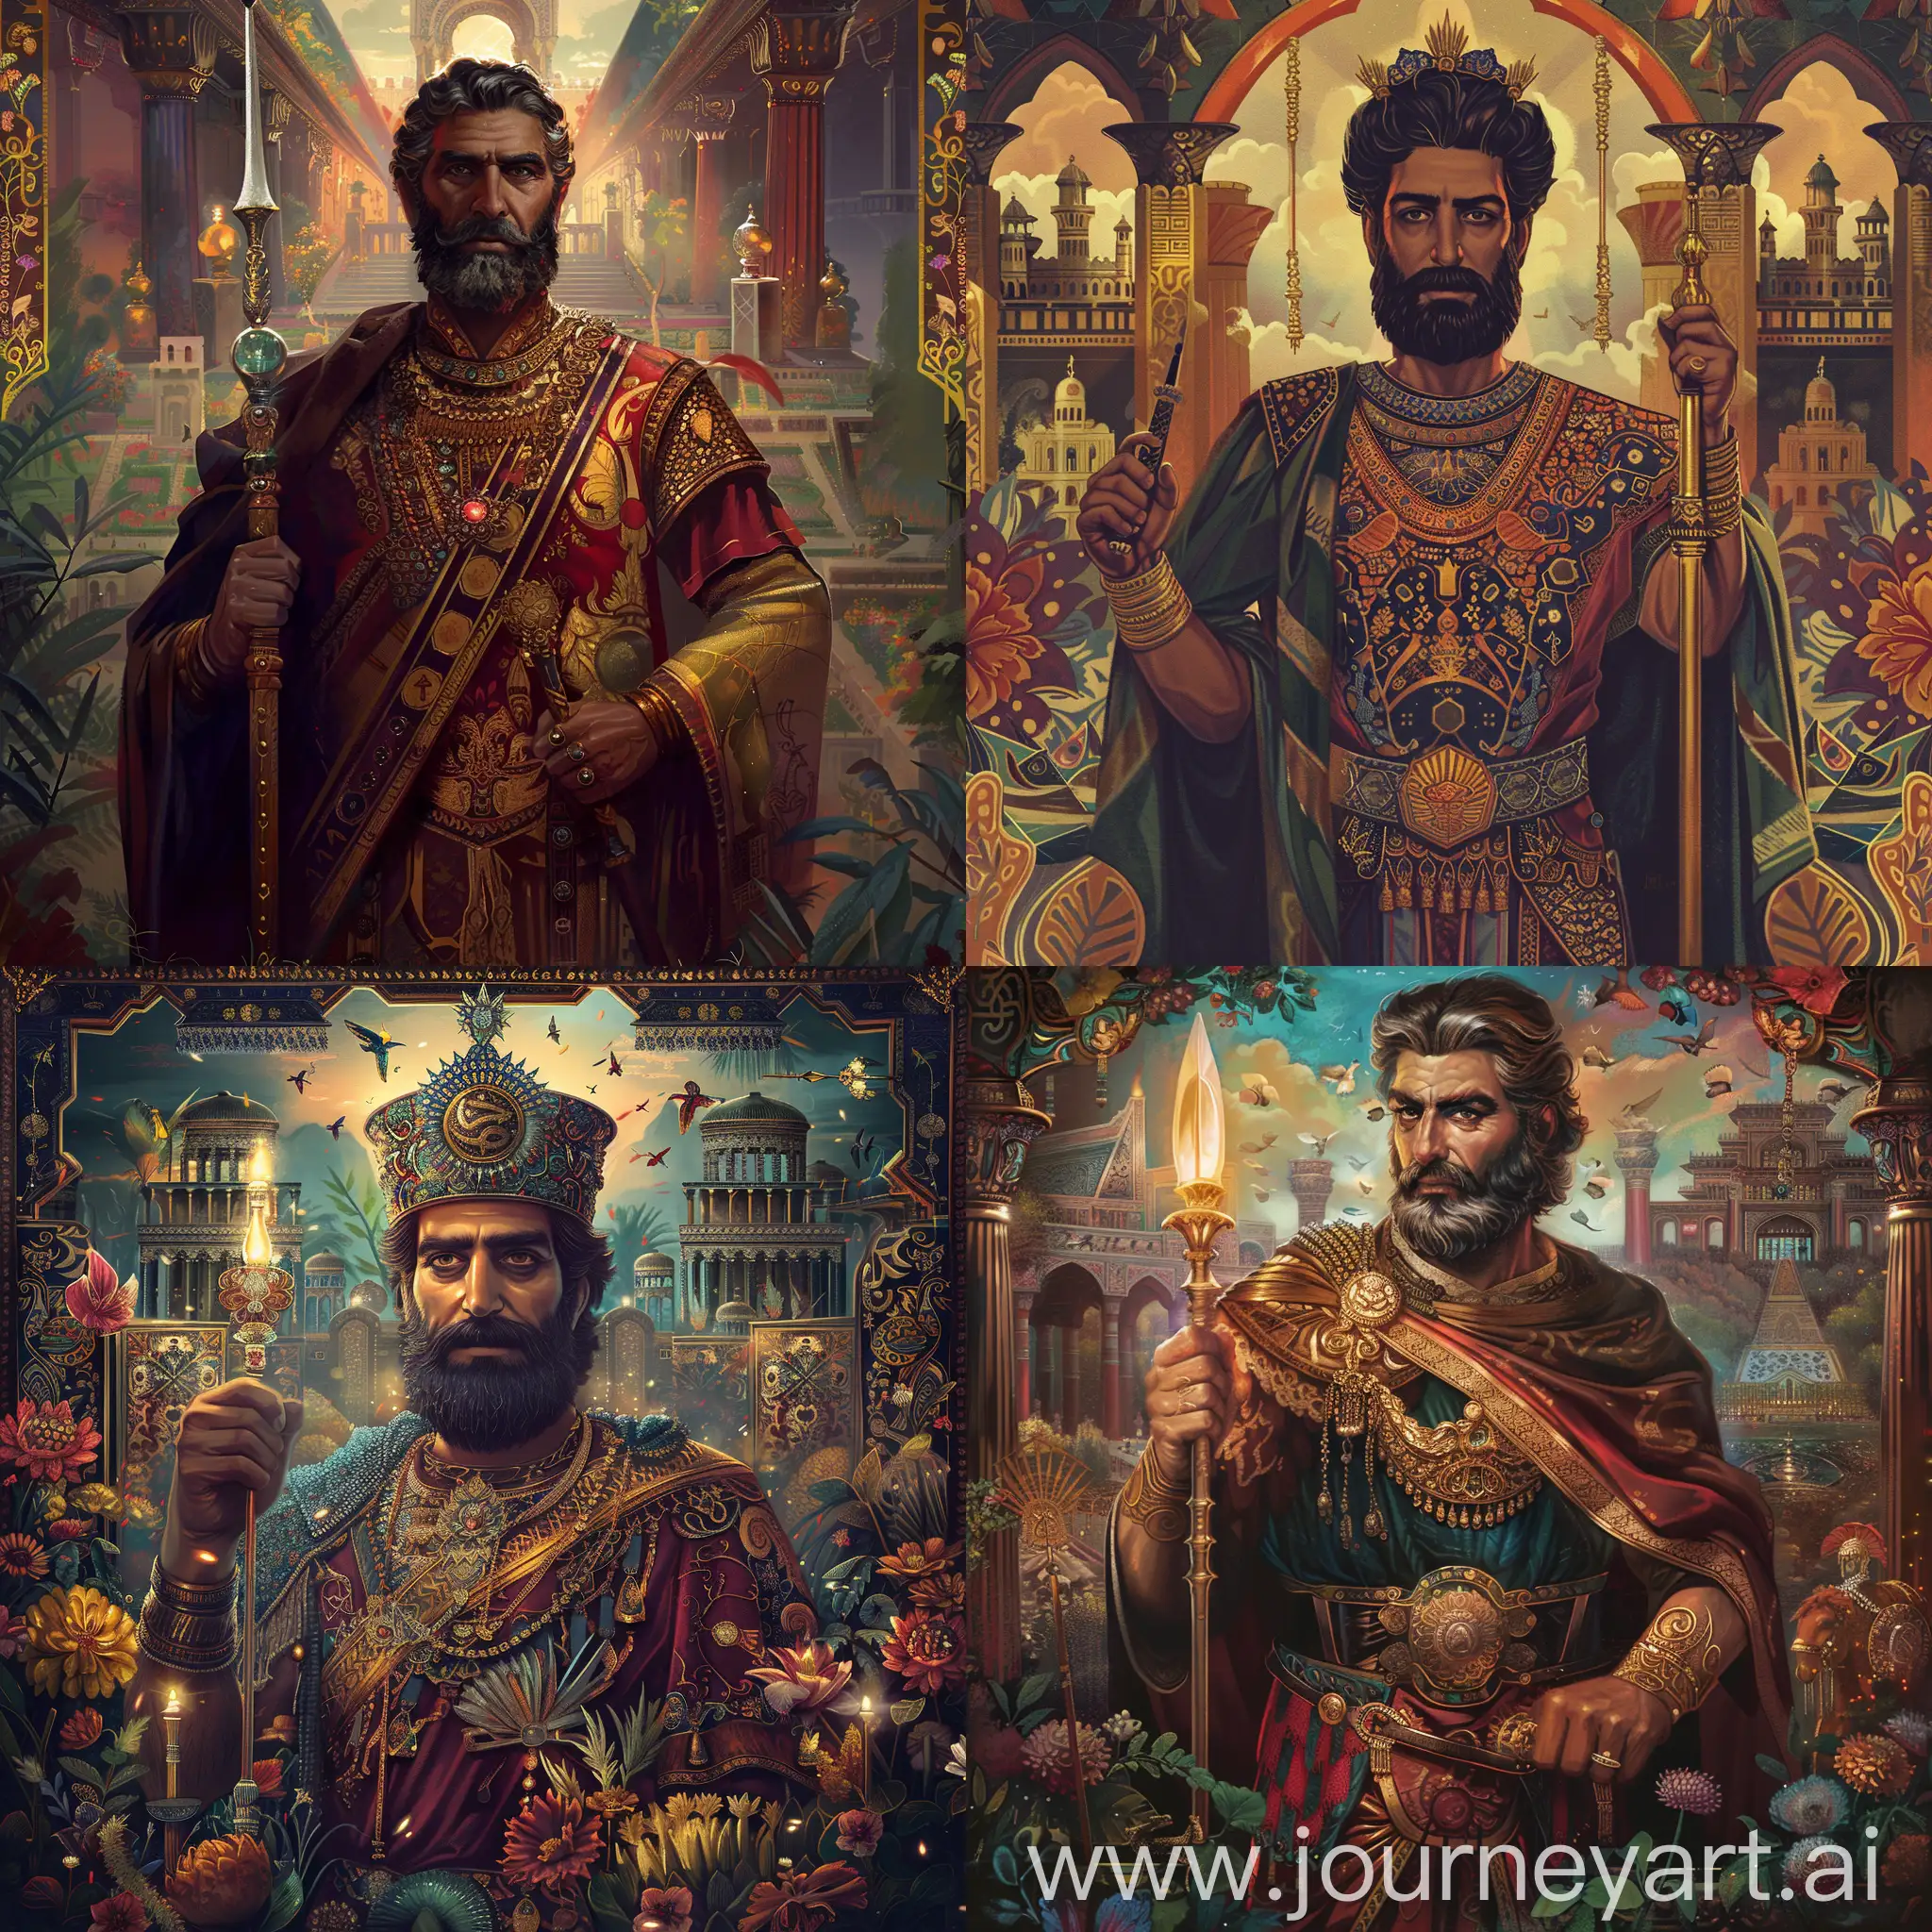 Cyrus-the-Great-Achaemenid-Empire-Regal-Portrait-with-Symbols-of-Power-and-Persian-Cultural-Elements